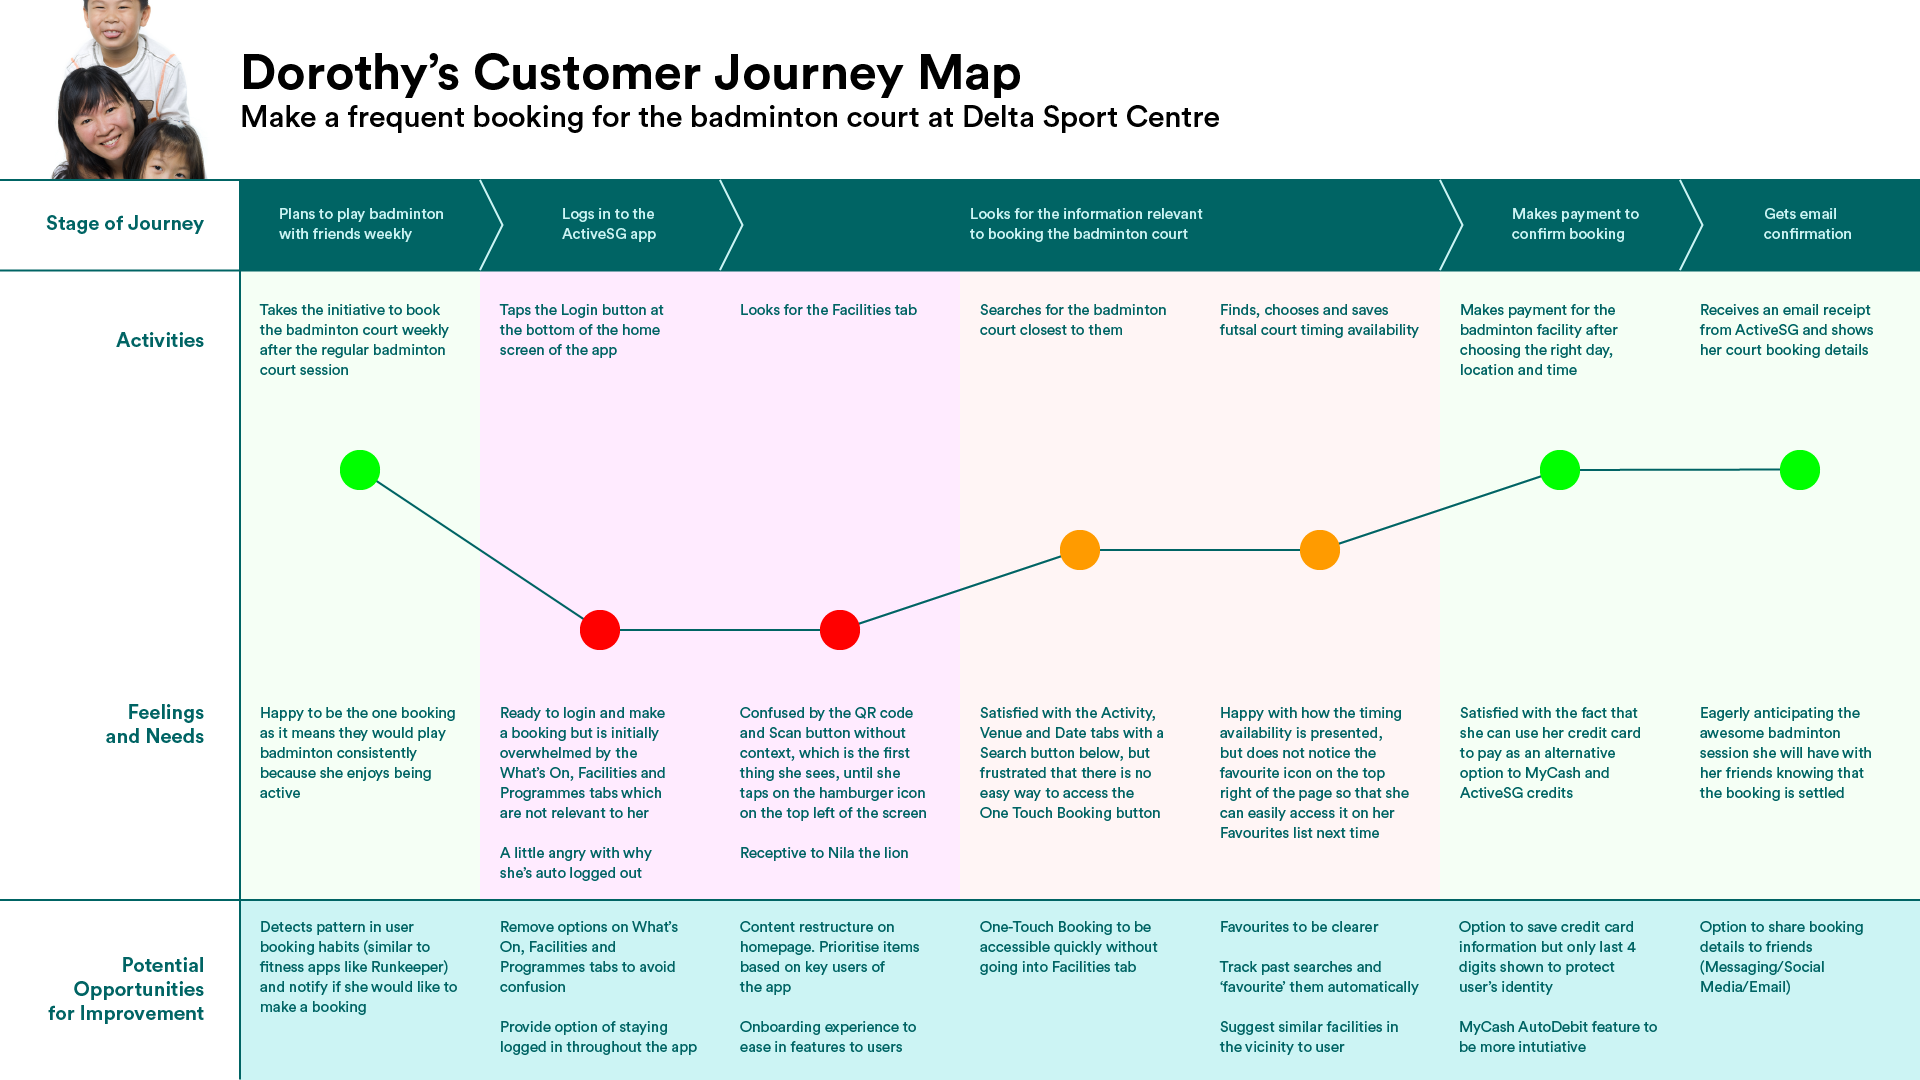 Wife experiences. Customer Journey Map построение. Customer Journey Map примеры. Карта customer Journey Map. Customer Journey Map примеры на русском.